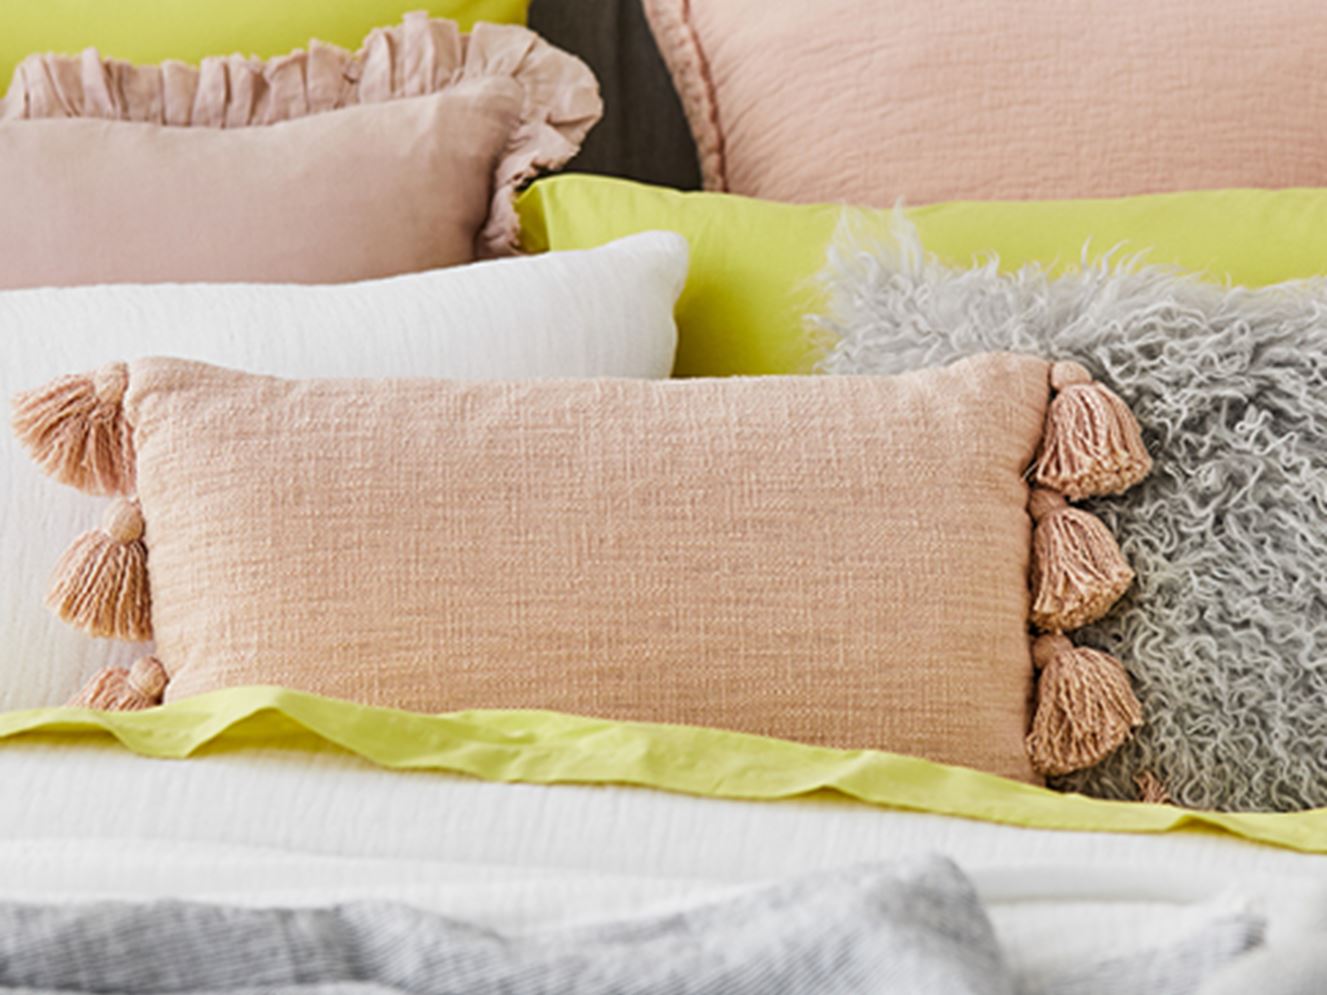 Various pillows with yellow, pink and grey tones placed on the bed